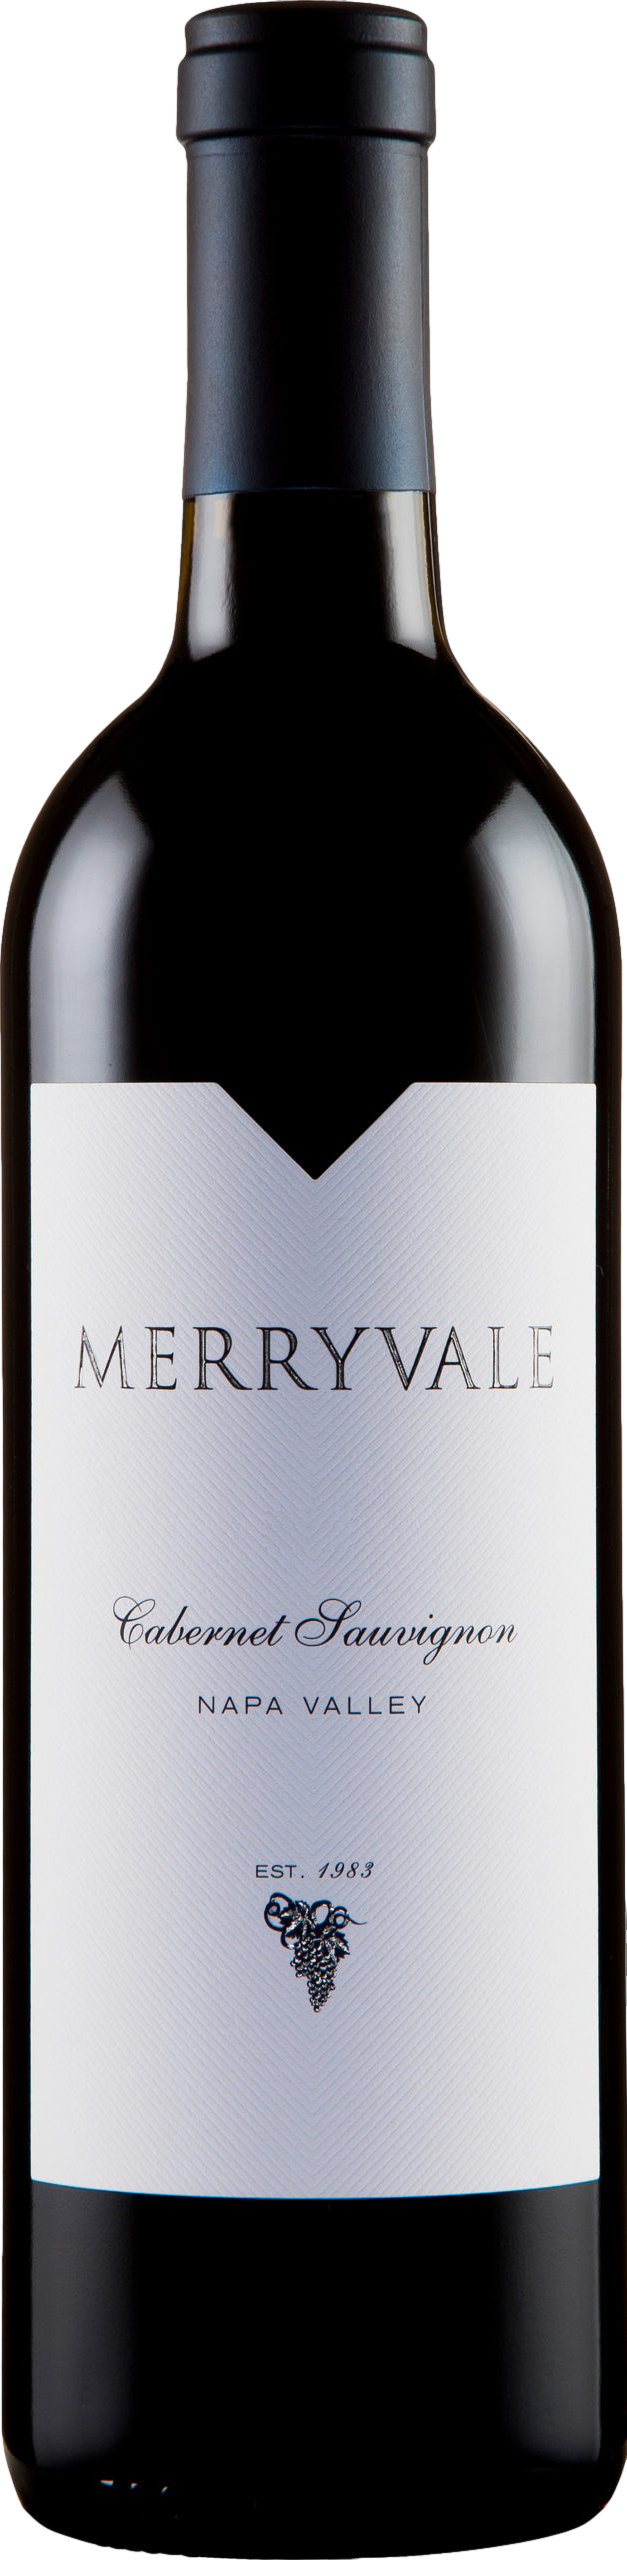 Merryvale Cabernet Sauvignon 2017 Merryvale 8wines DACH